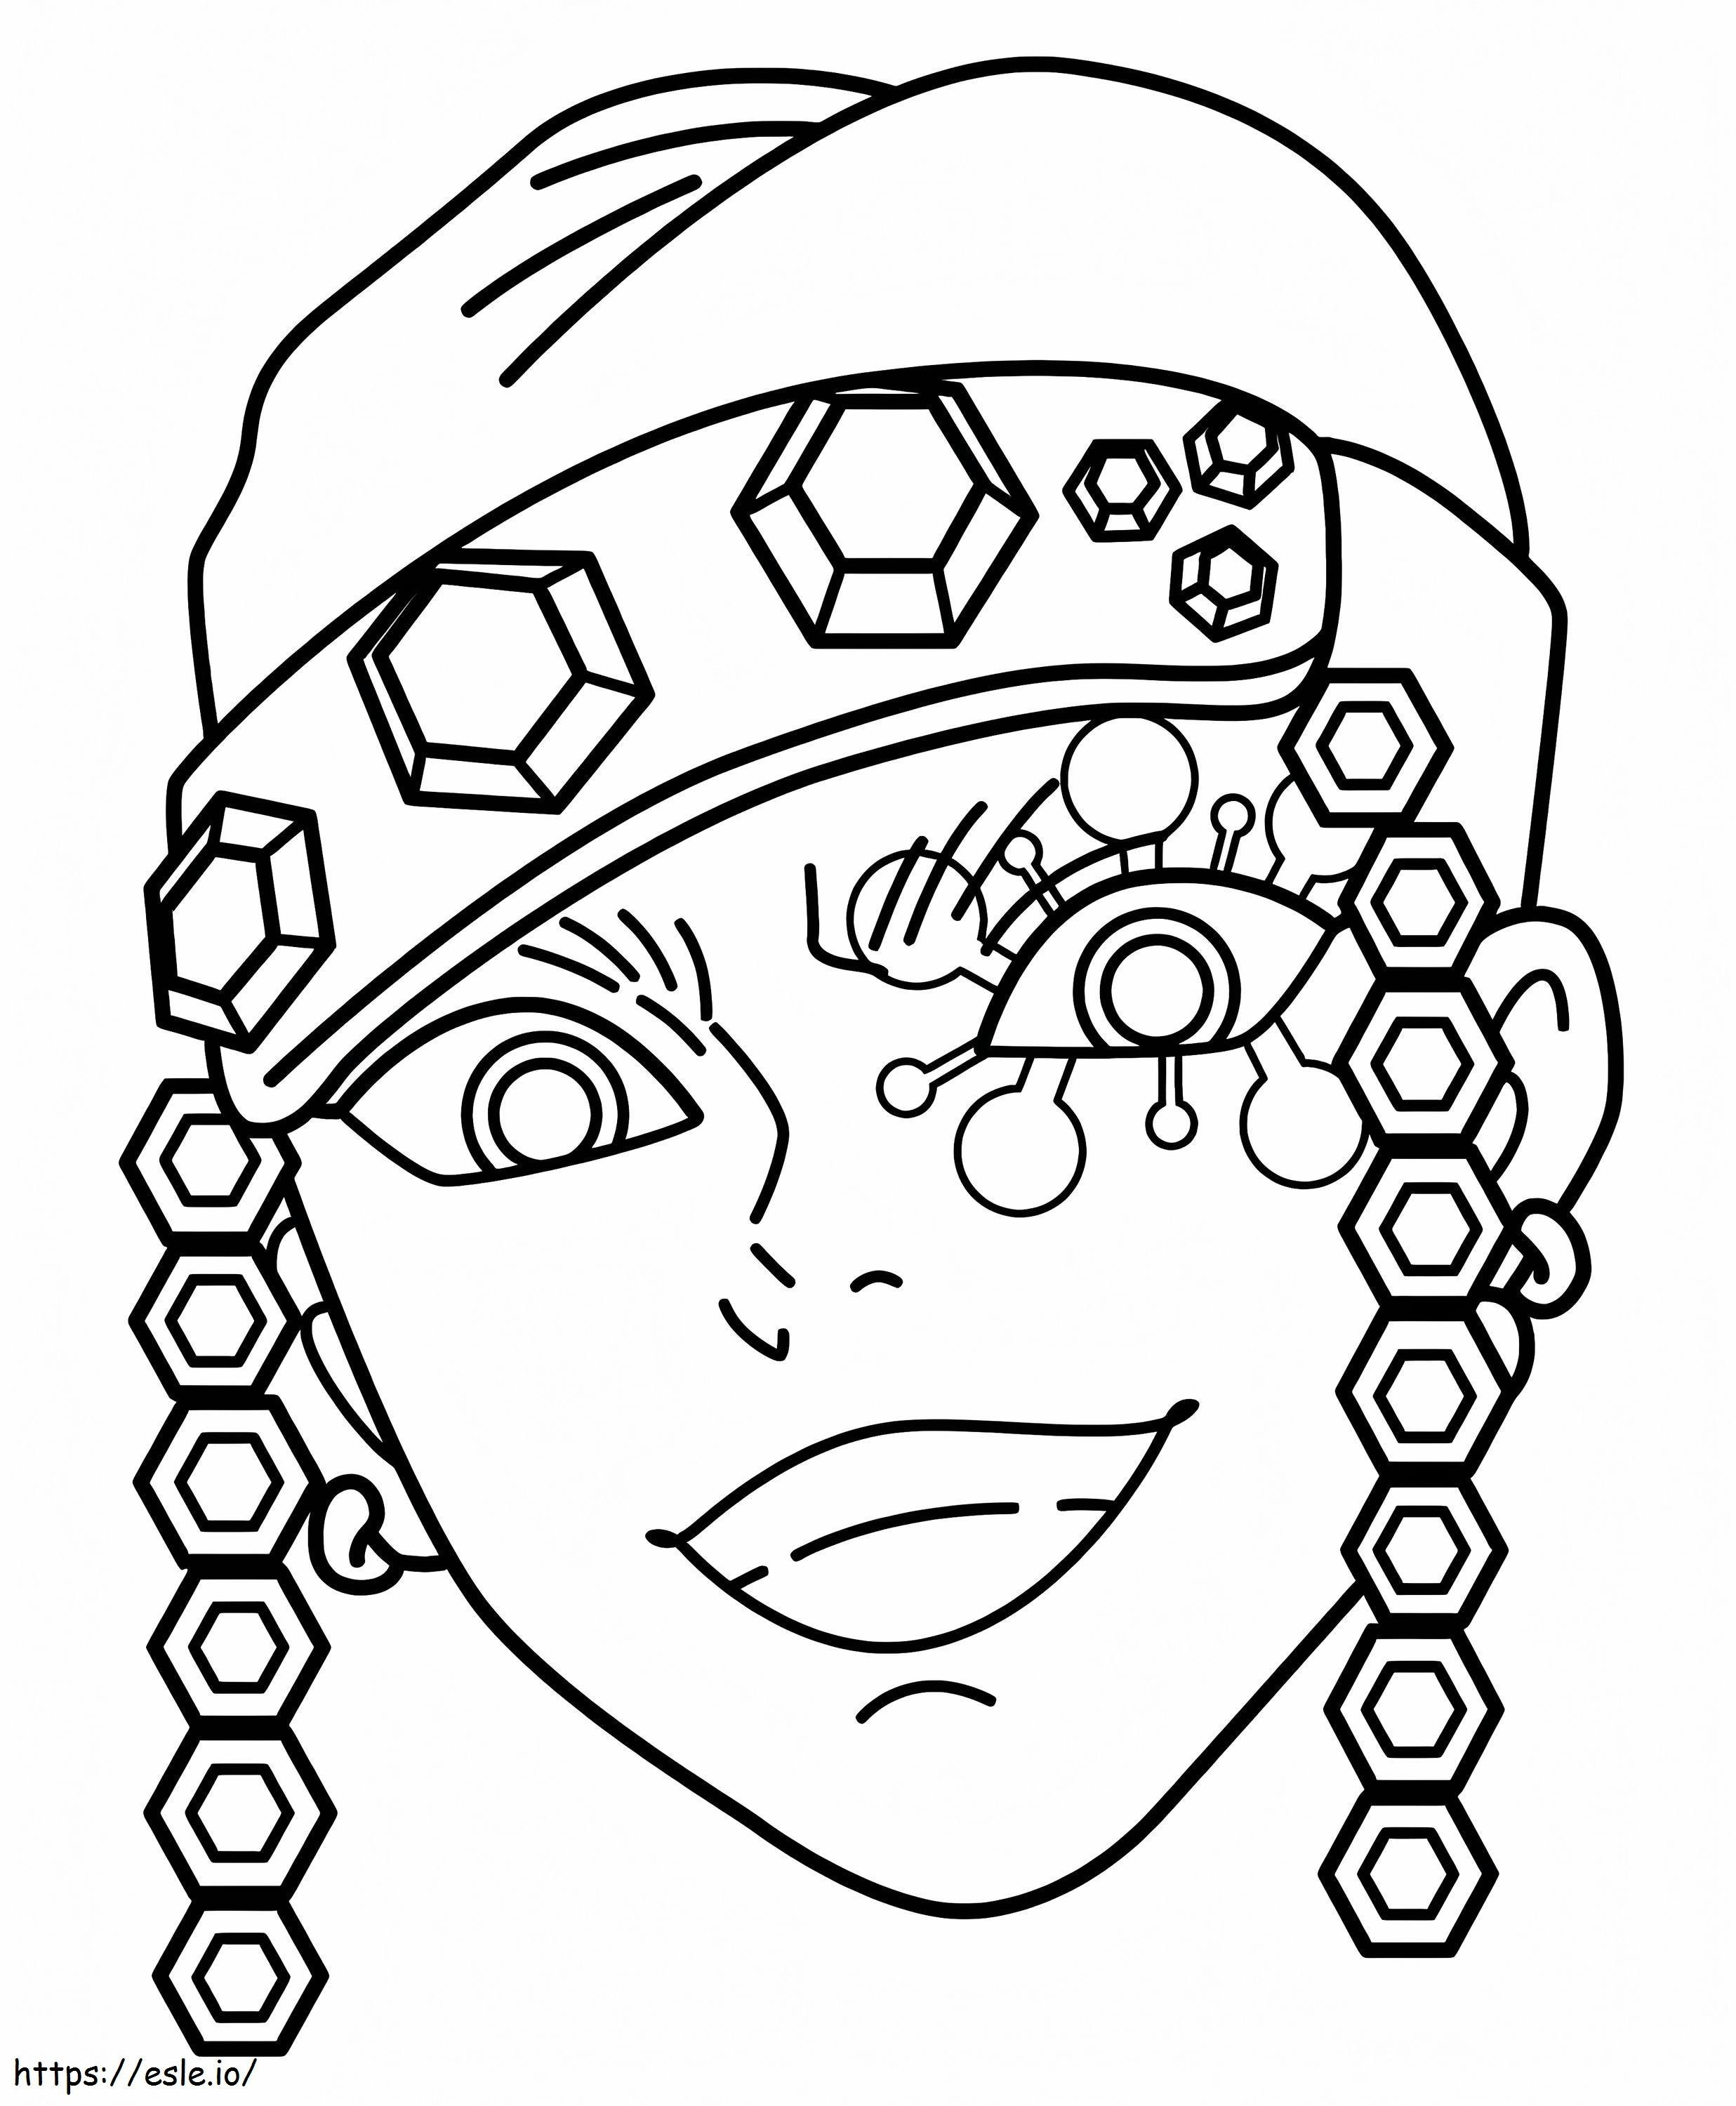 Right Uzuis Face coloring page